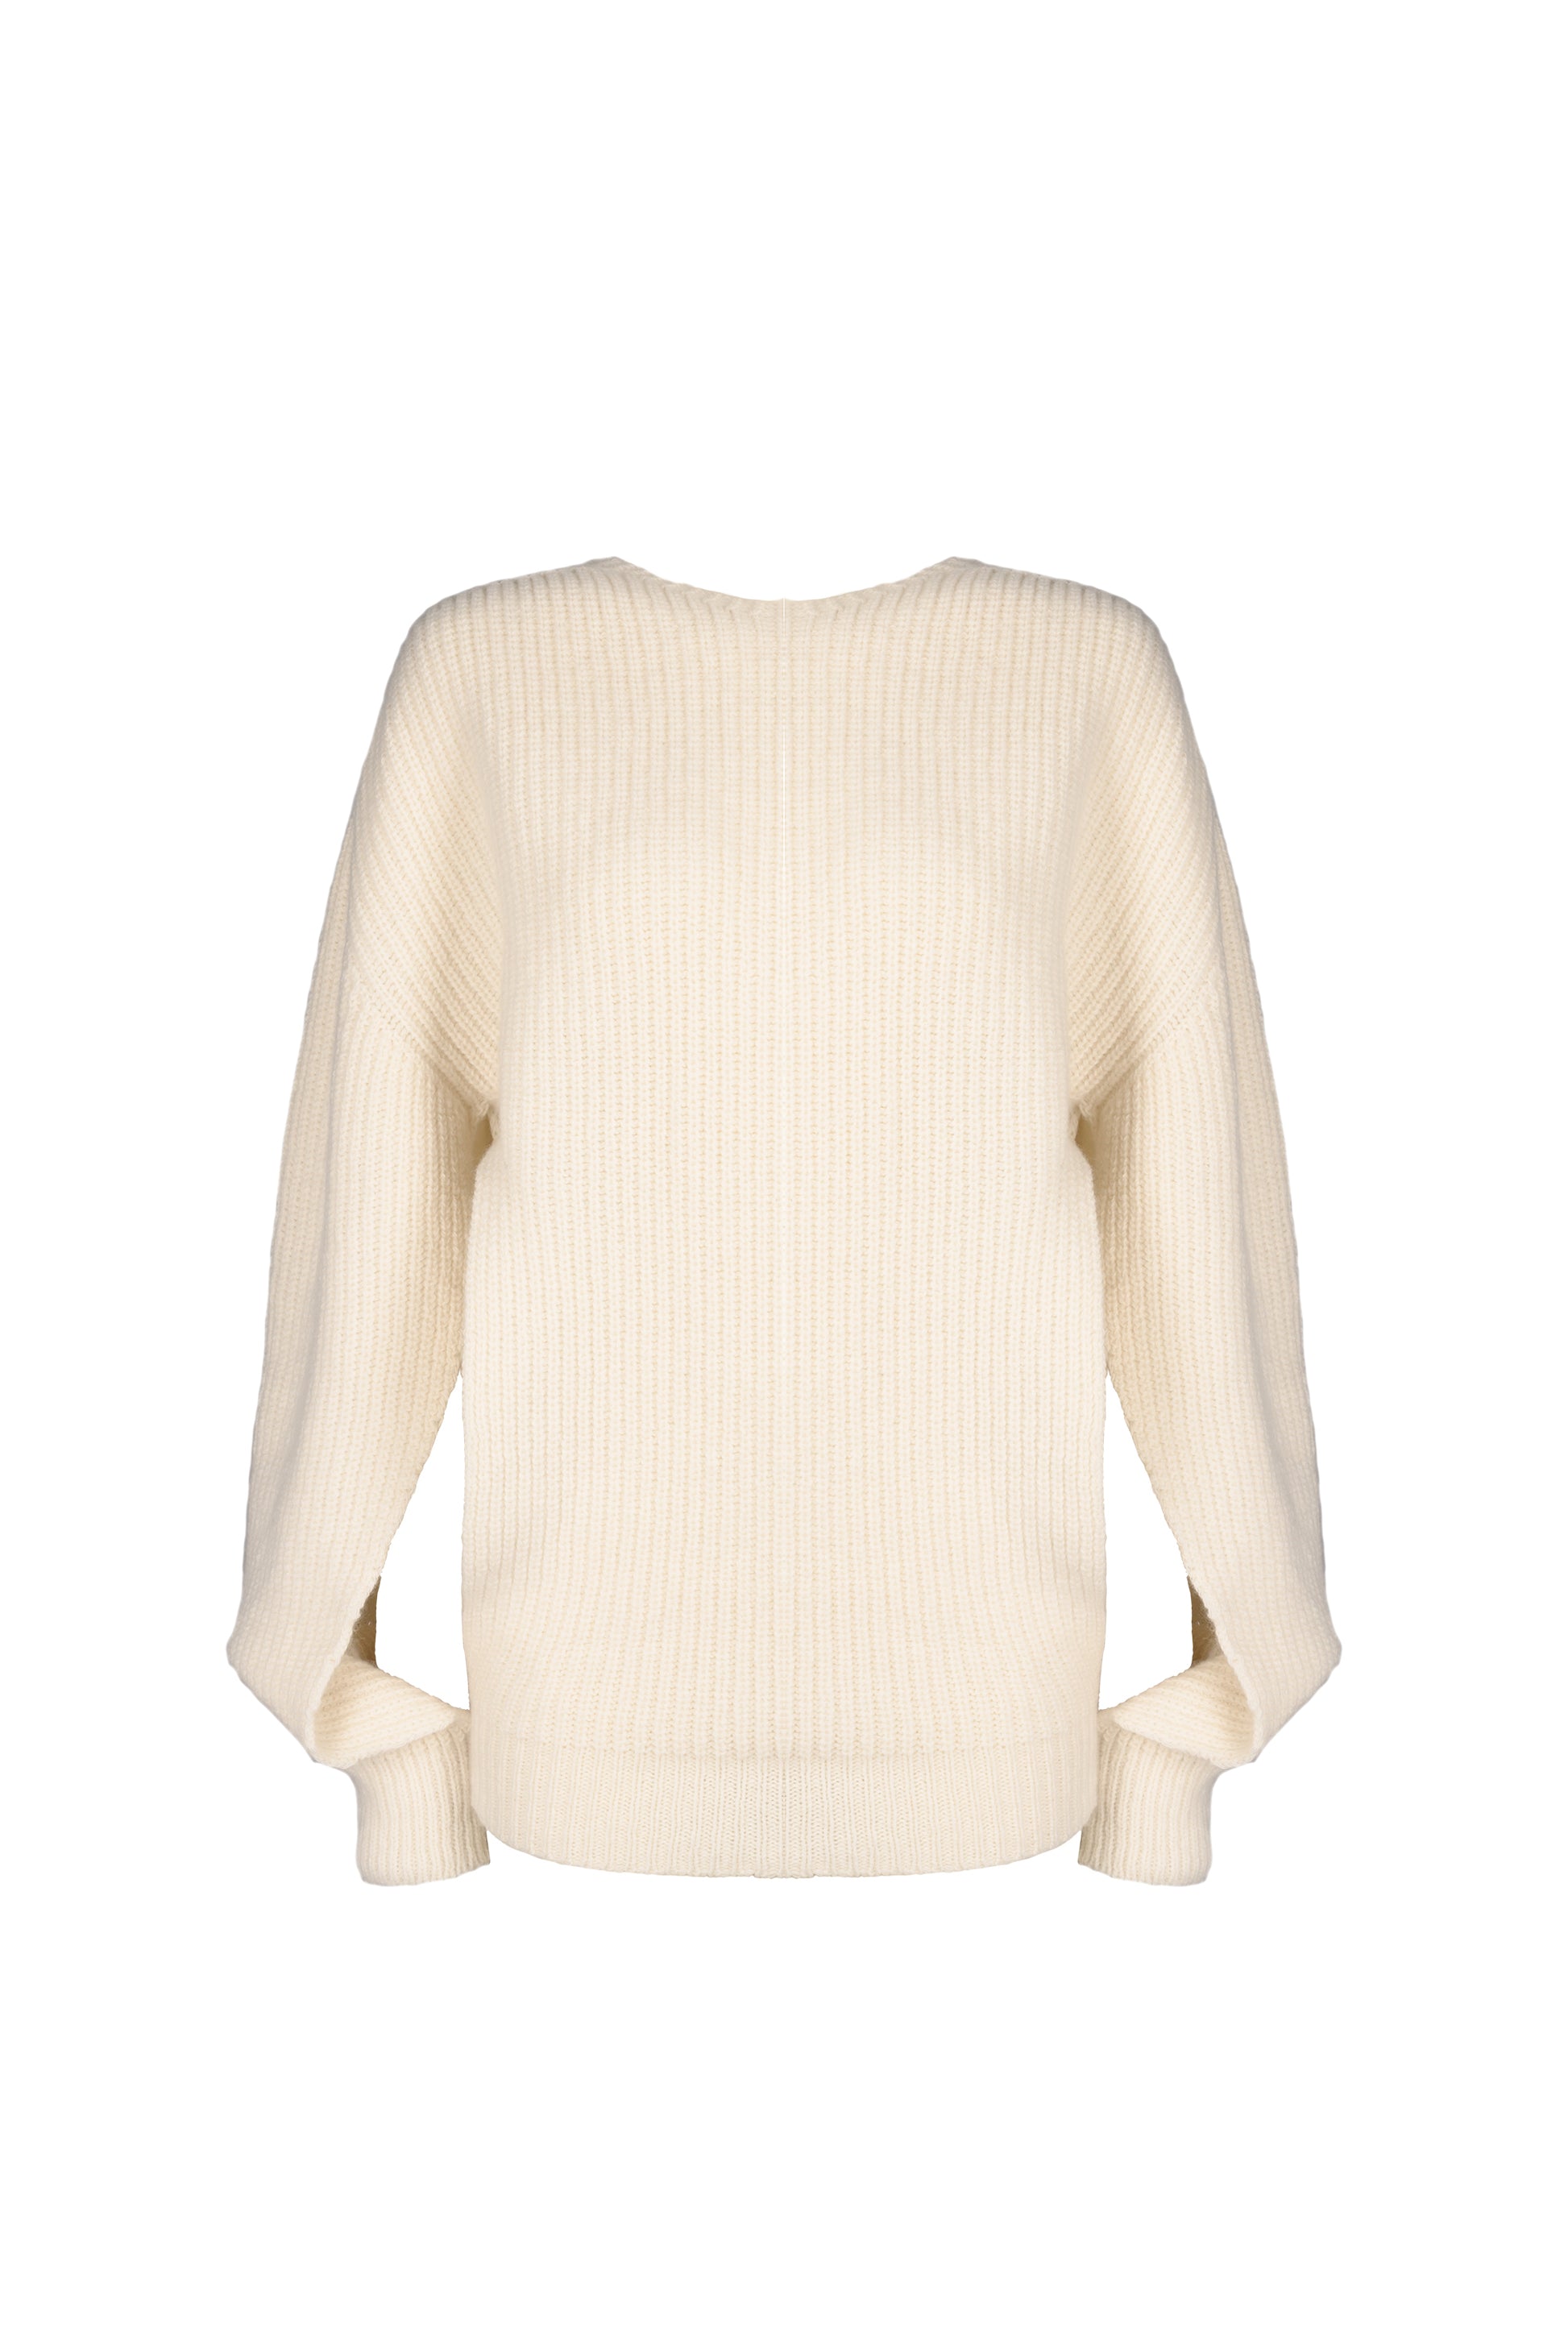 Luxurious oversized chunky knit jumper featuring open sleeves and an open body design, combined with a ribbed texture for a bold, fashion-forward statement.